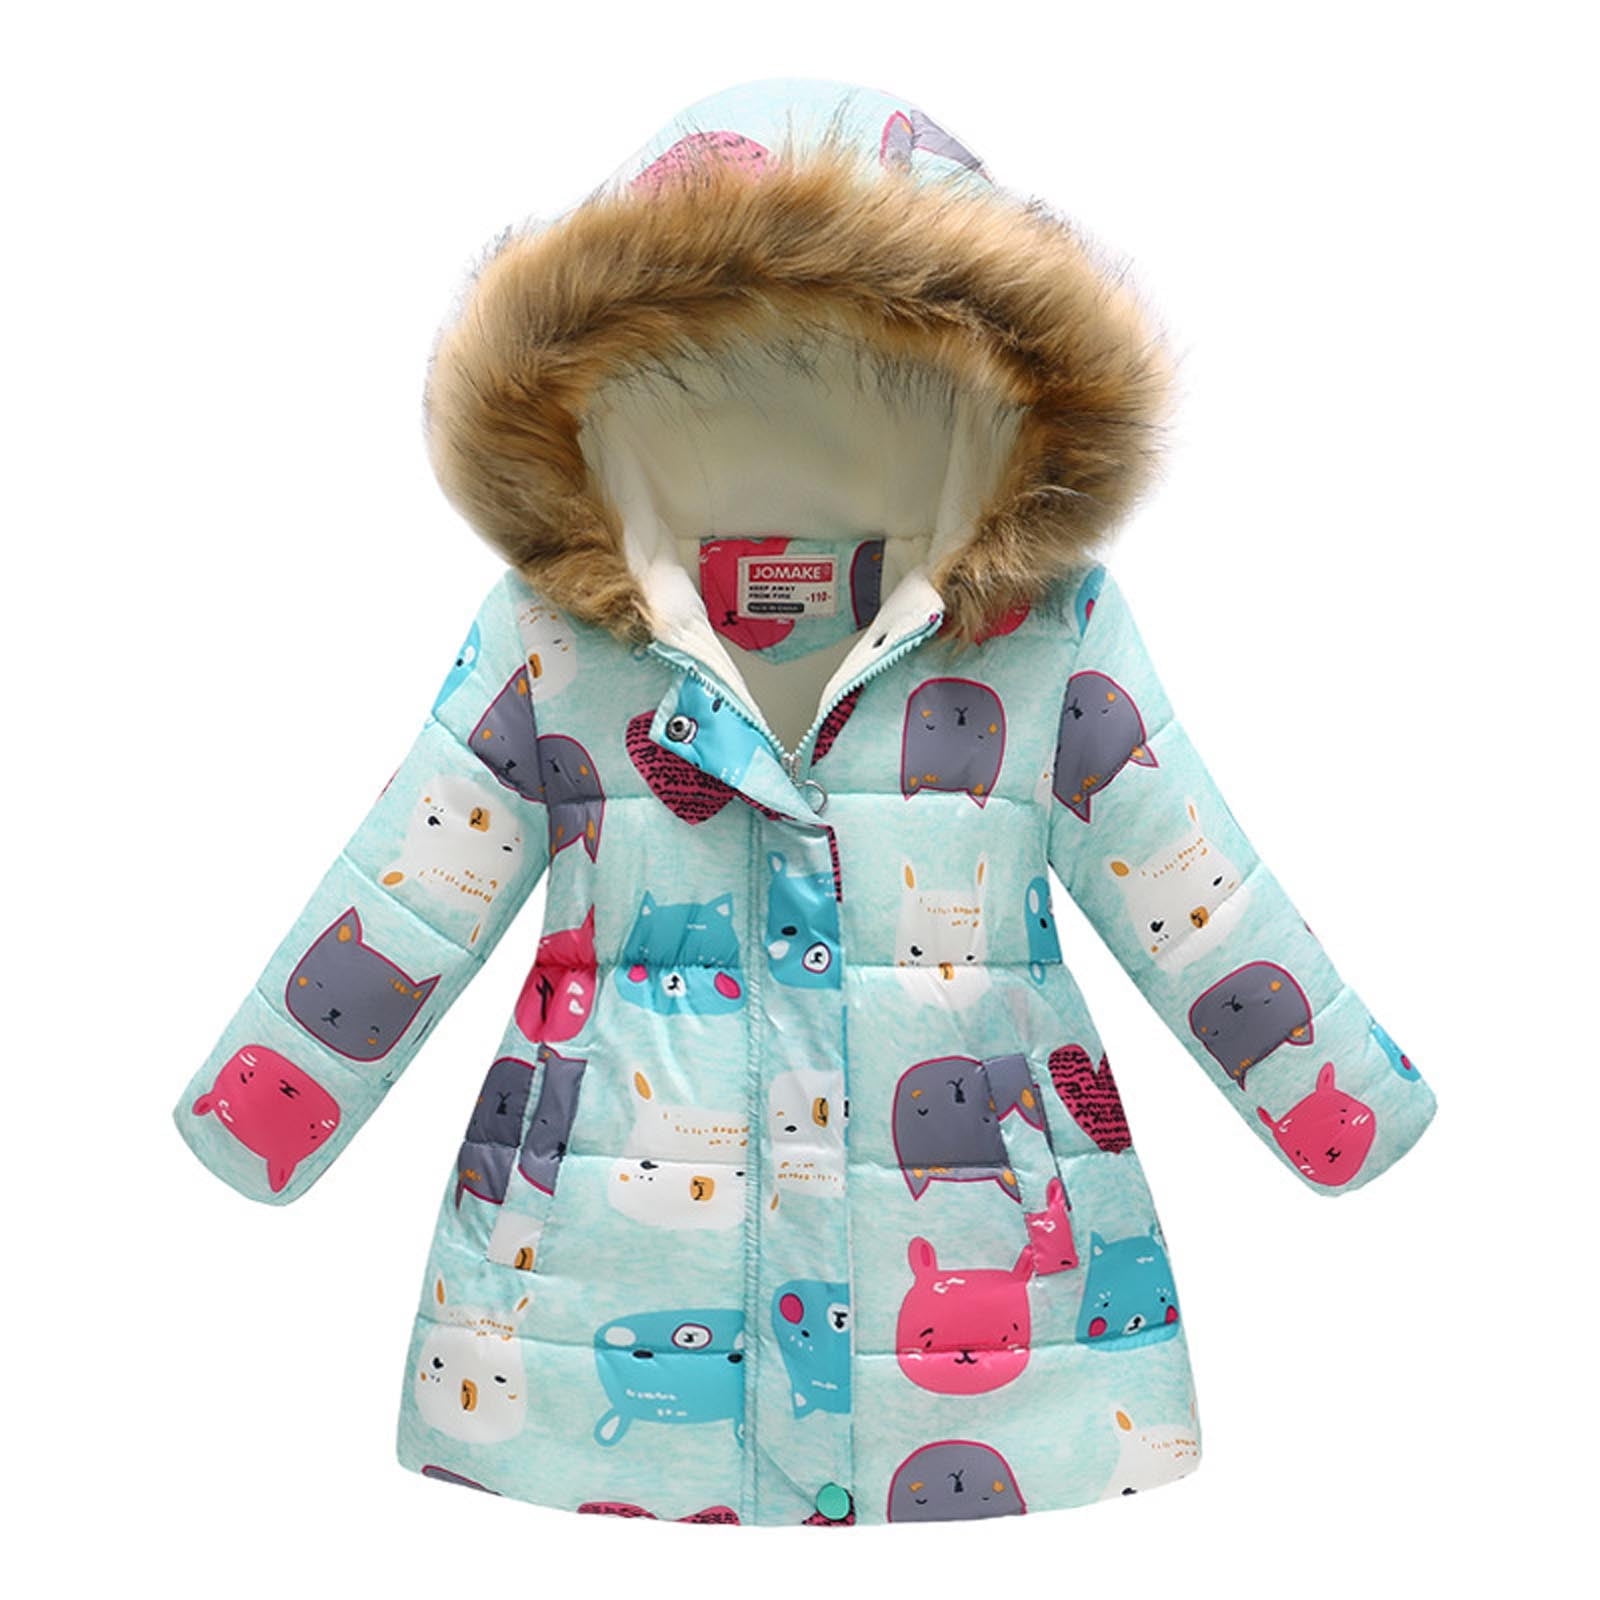 Details about   31 Style Toddler Kids Baby Grils Boys Warm Waistcoat Print Hooded Coat Tops Vest